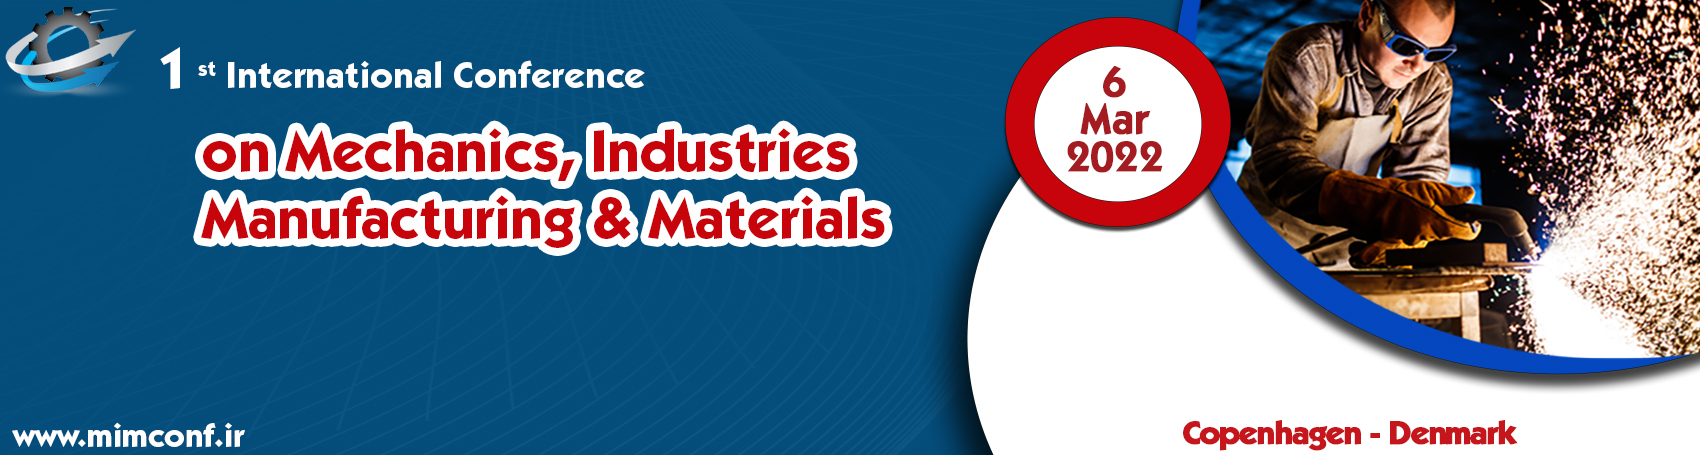 International Conference on Mechanics, Industries, Manufacturing and Materials